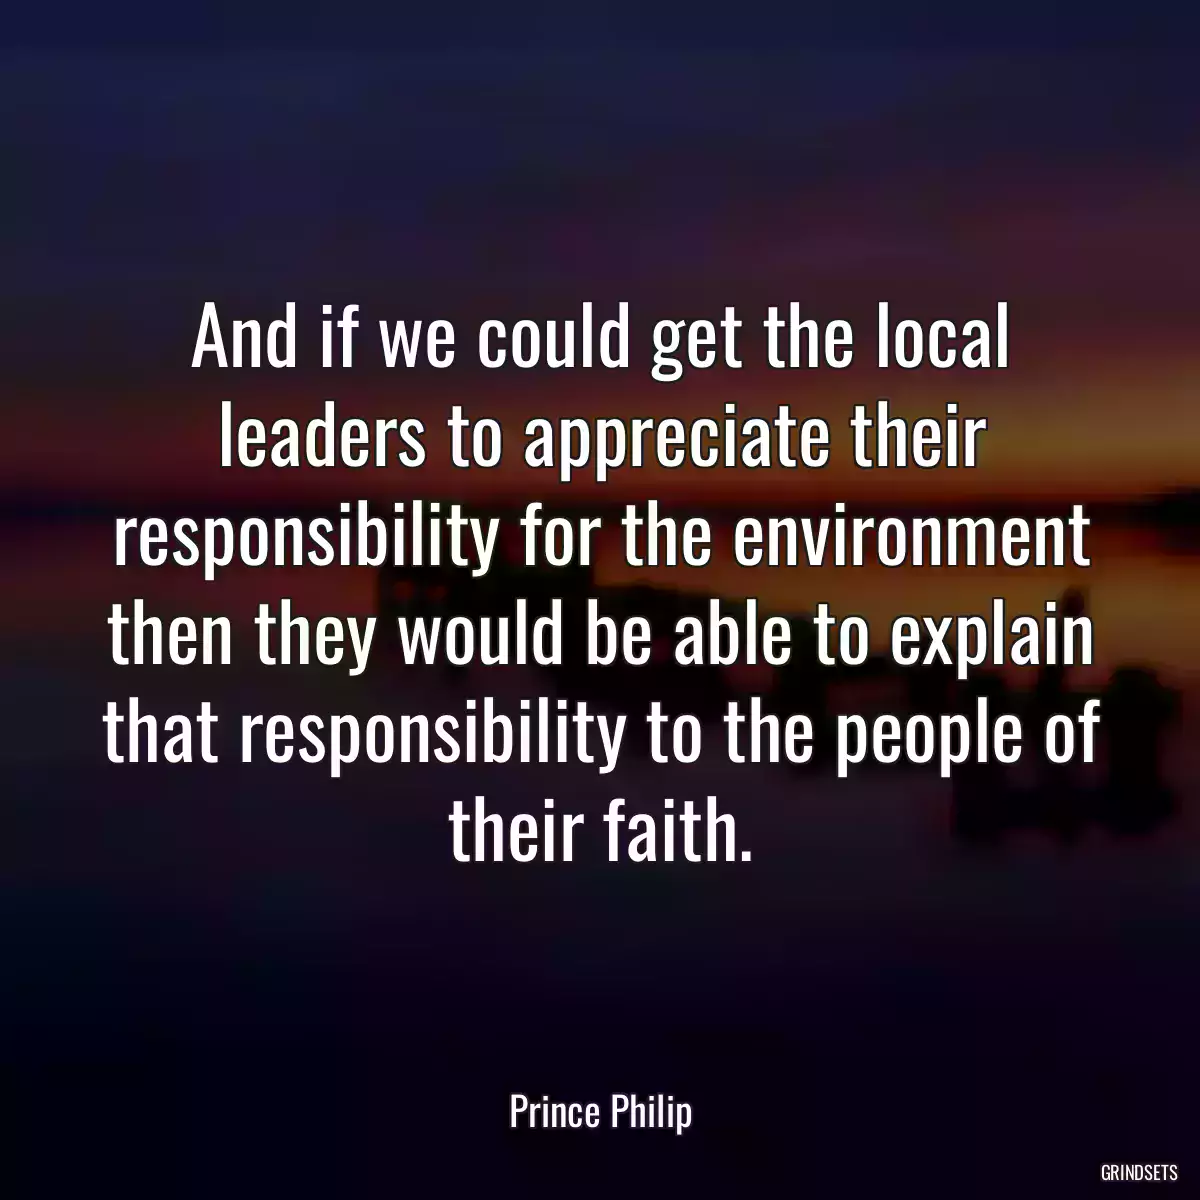 And if we could get the local leaders to appreciate their responsibility for the environment then they would be able to explain that responsibility to the people of their faith.